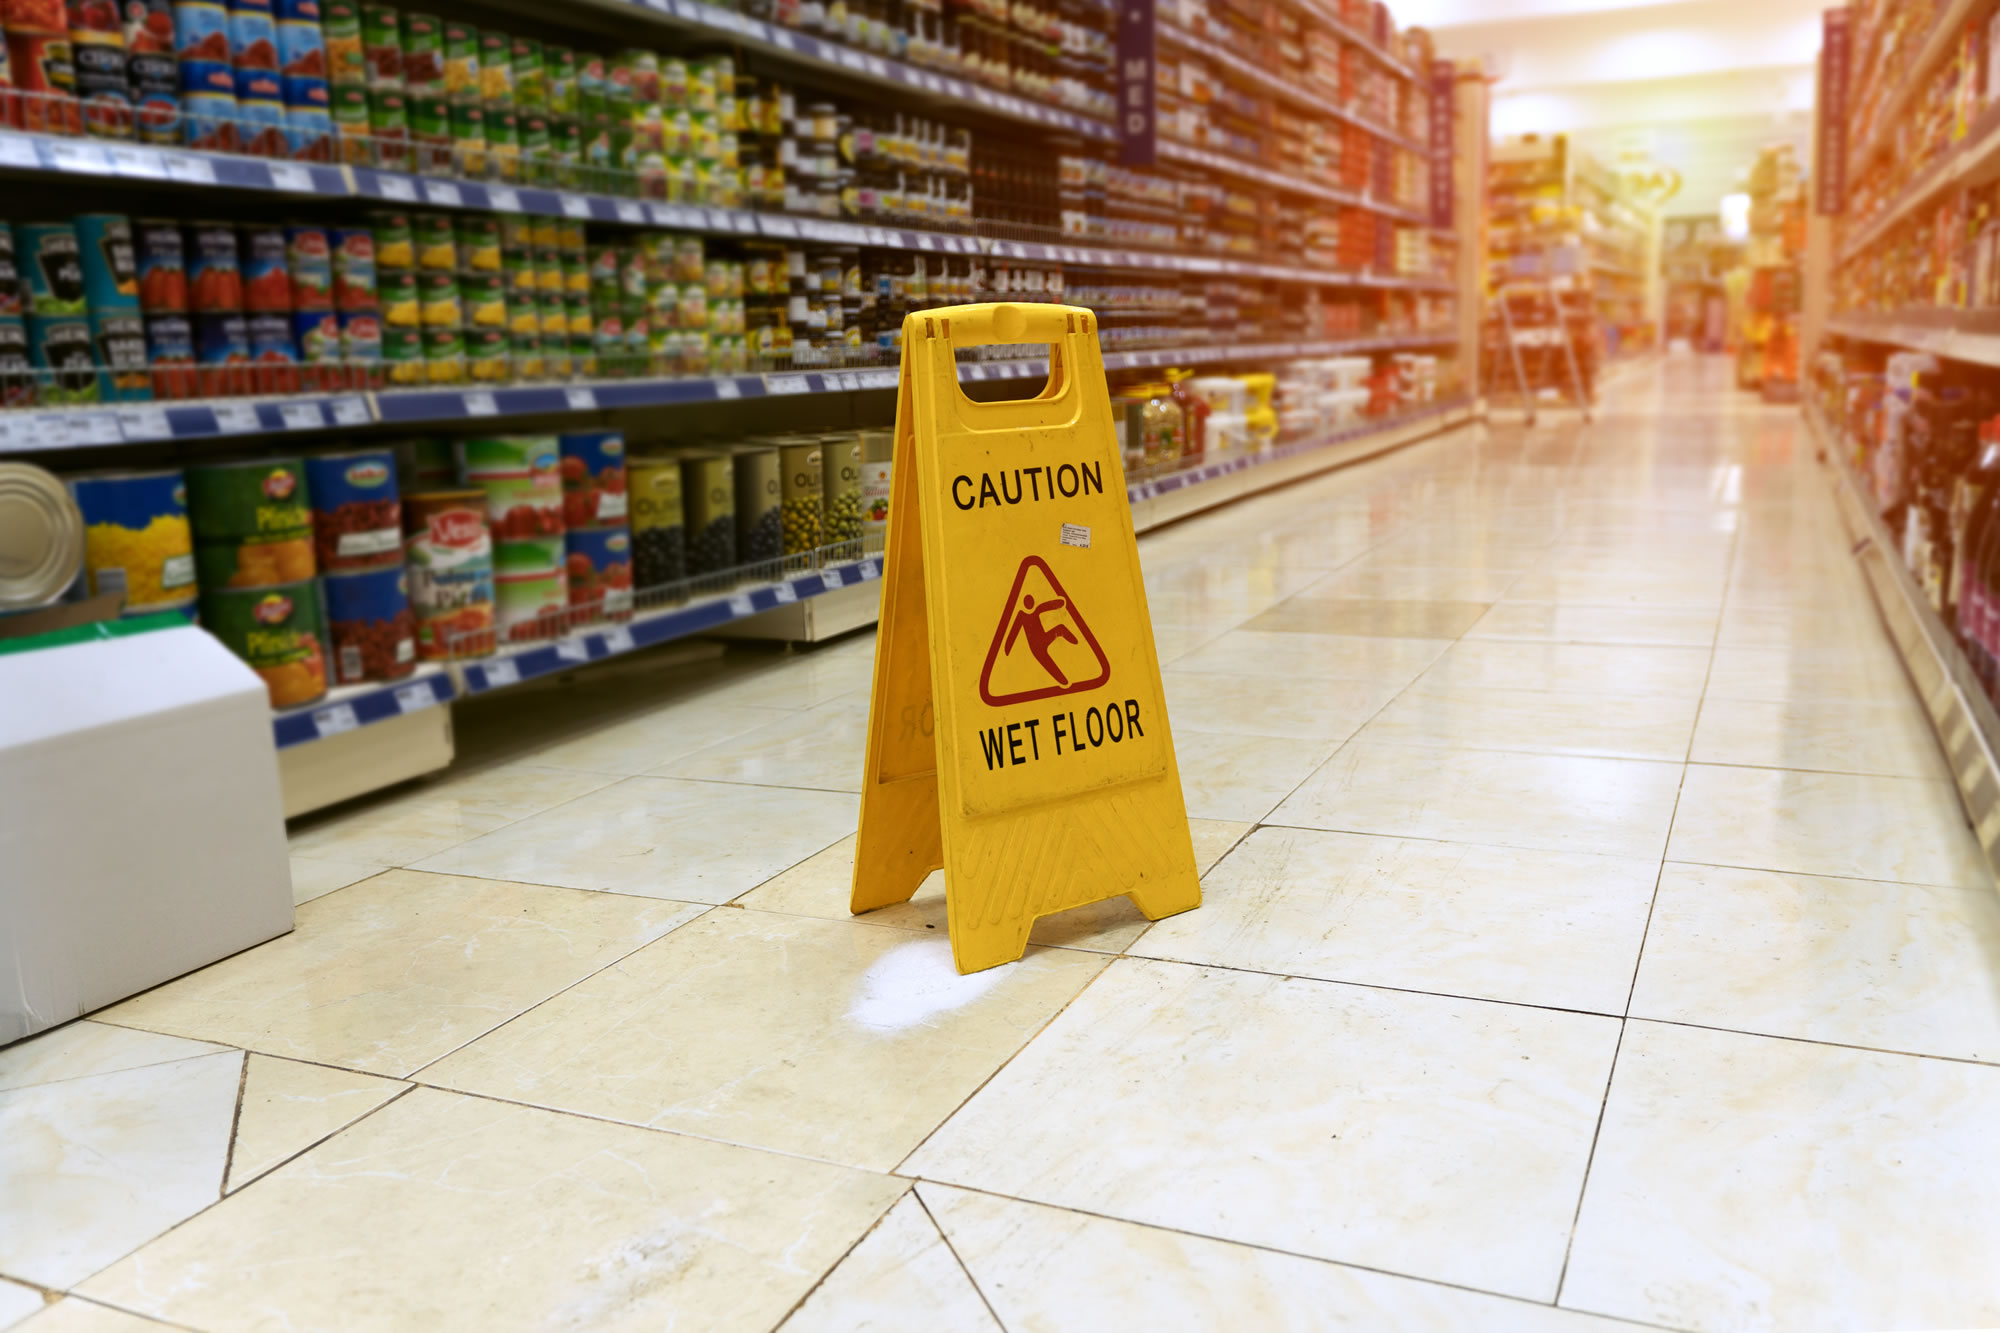 Slips, Trips & Falls - public liability - injury in public - in supermarkets, shops and shopping centres